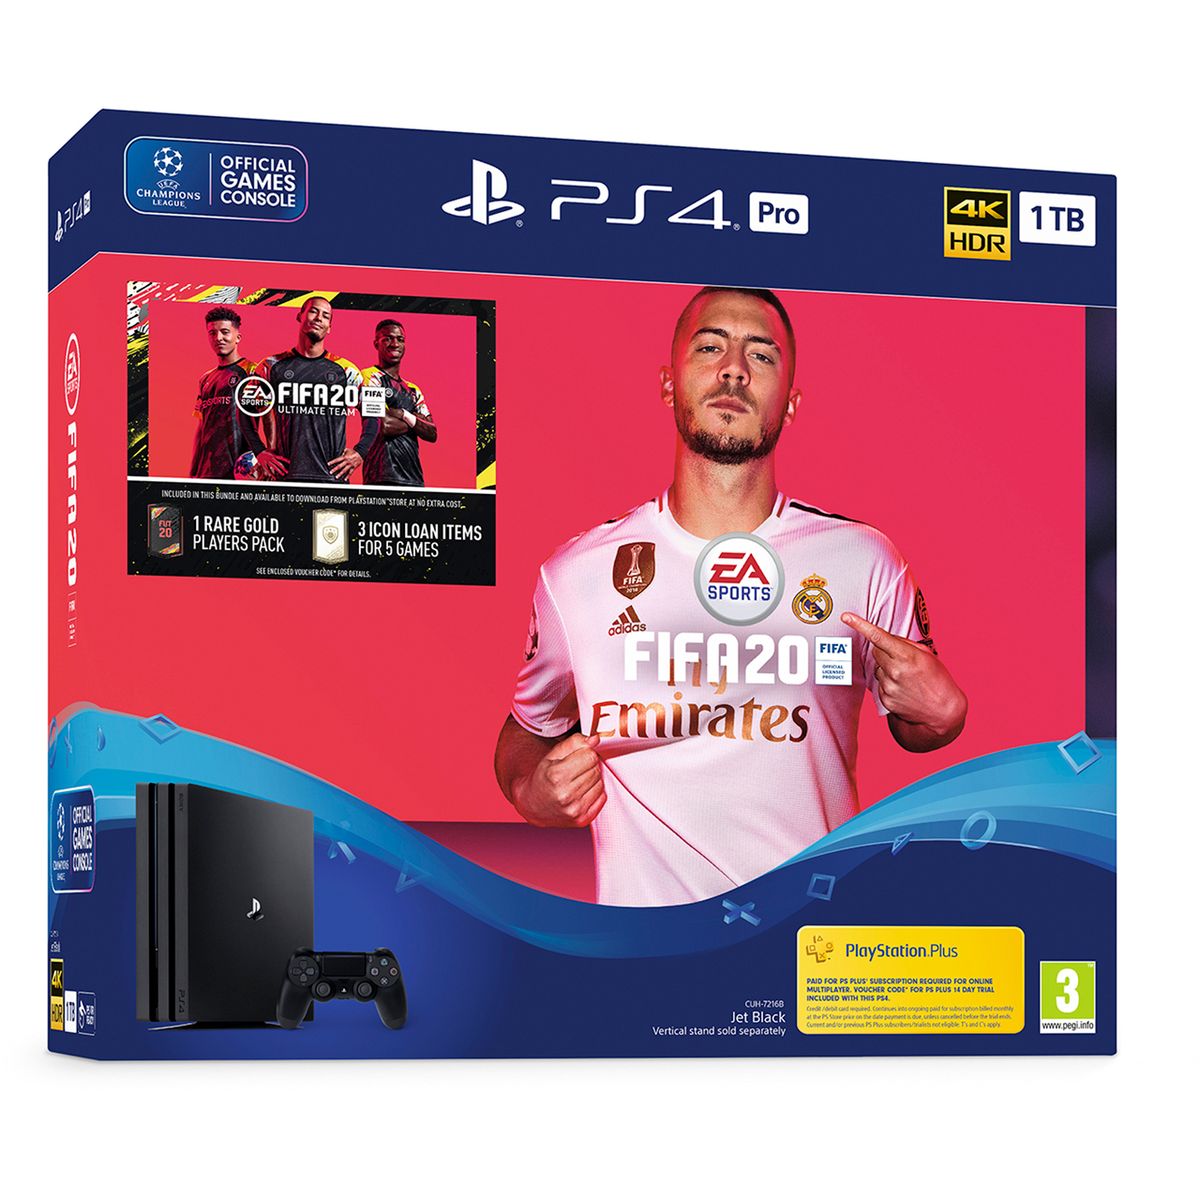 ps4 fifa and call of duty bundle